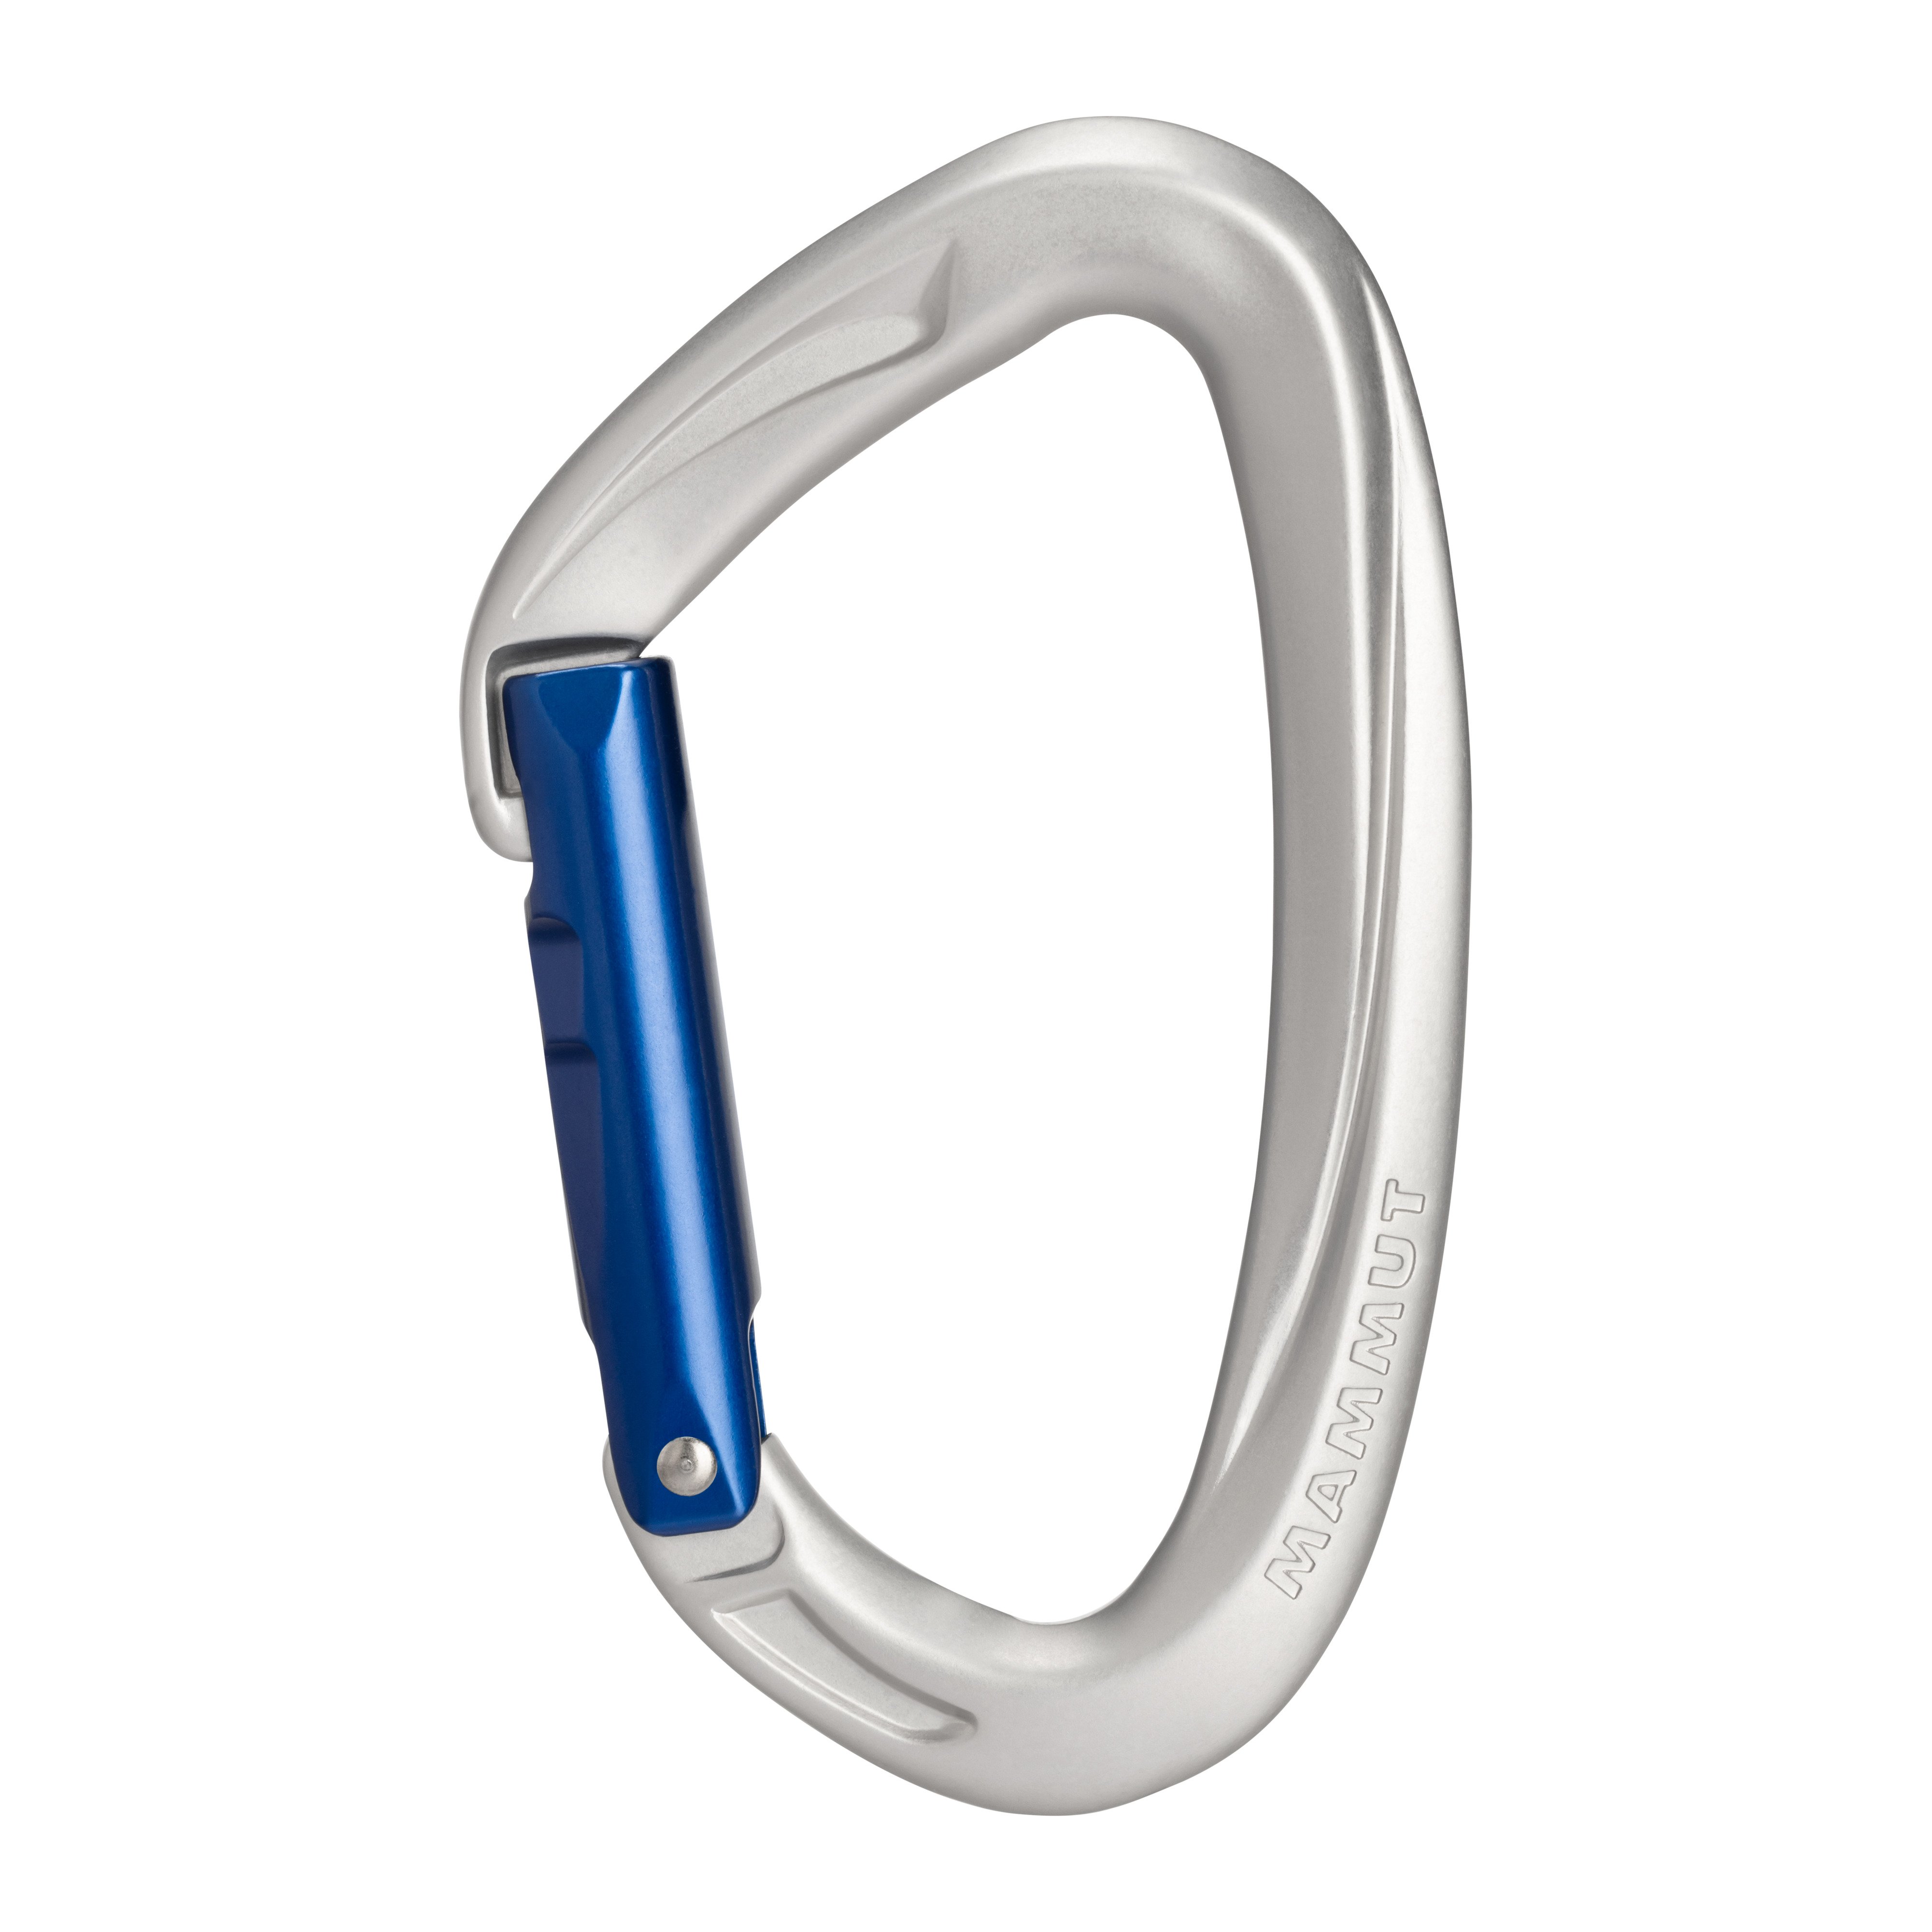 Crag Key Lock - silver, one size product image